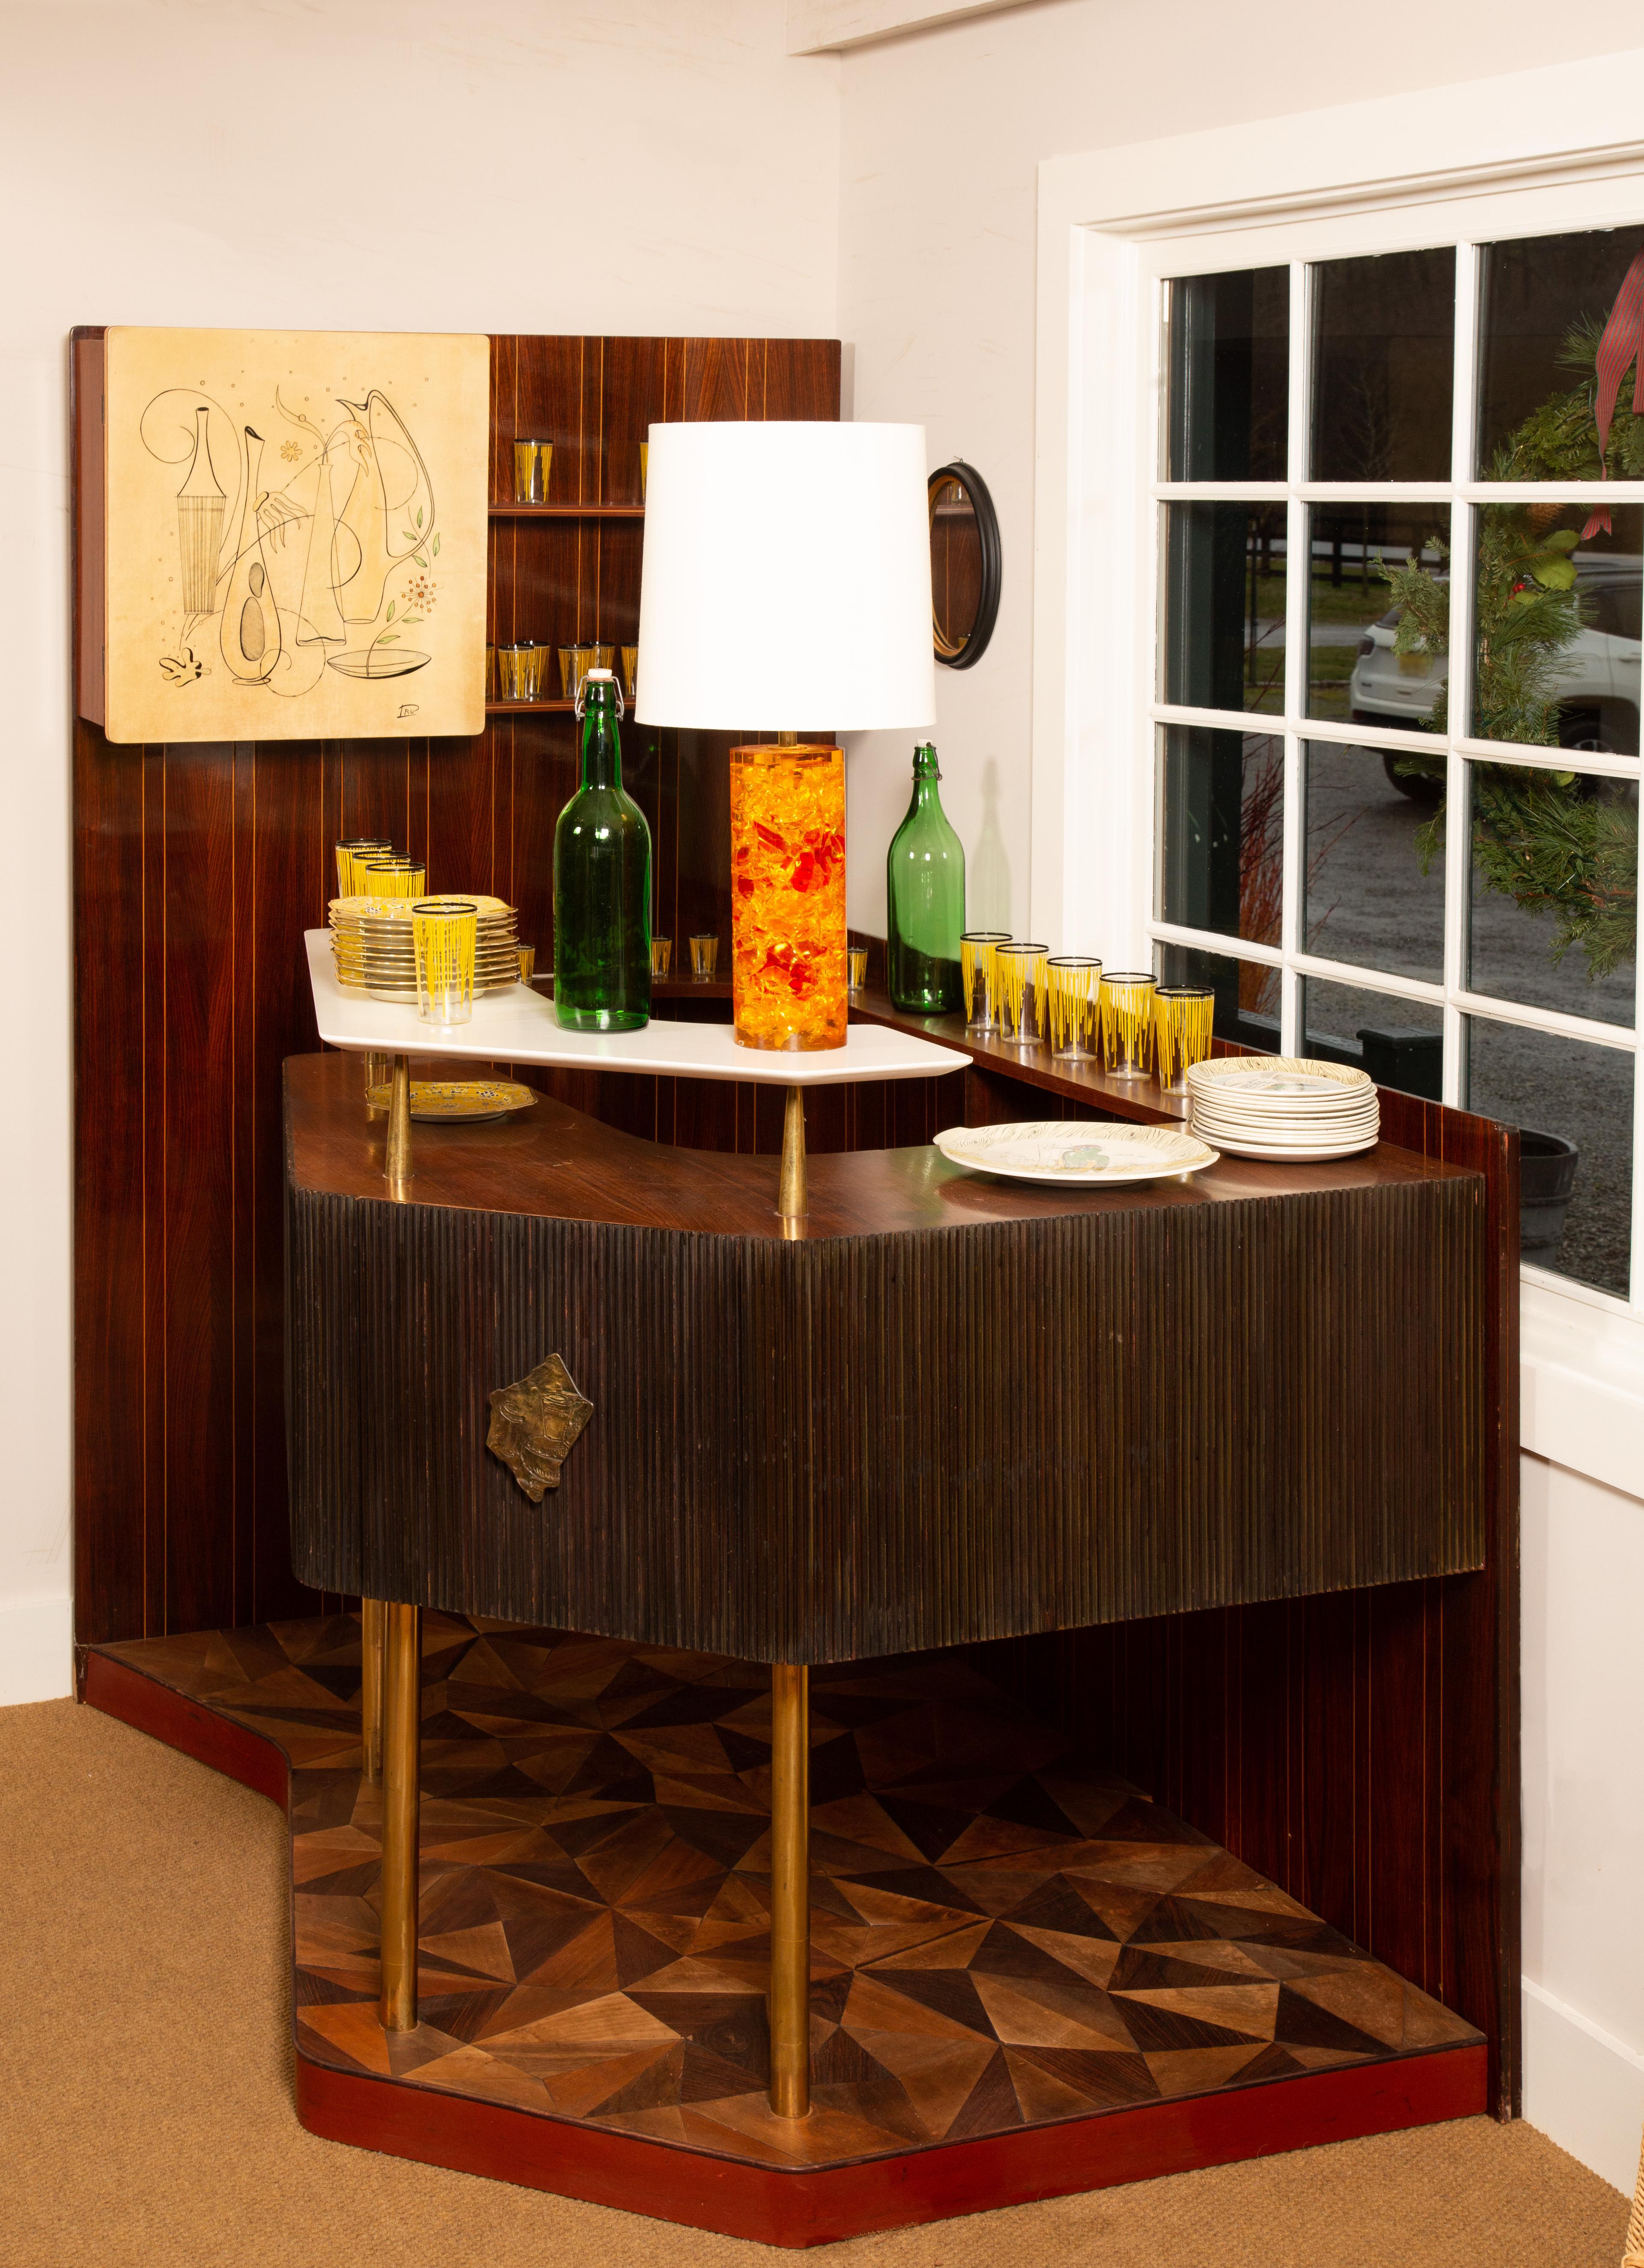 Rare high-style Italian drybar cabinet made by La Permanente Mobili Cantu in the 1950s. The drybar is made of Macassar wood veneer and features a modernist graphic design on the door of the cabinet, which is used to store decanters and bottles. The